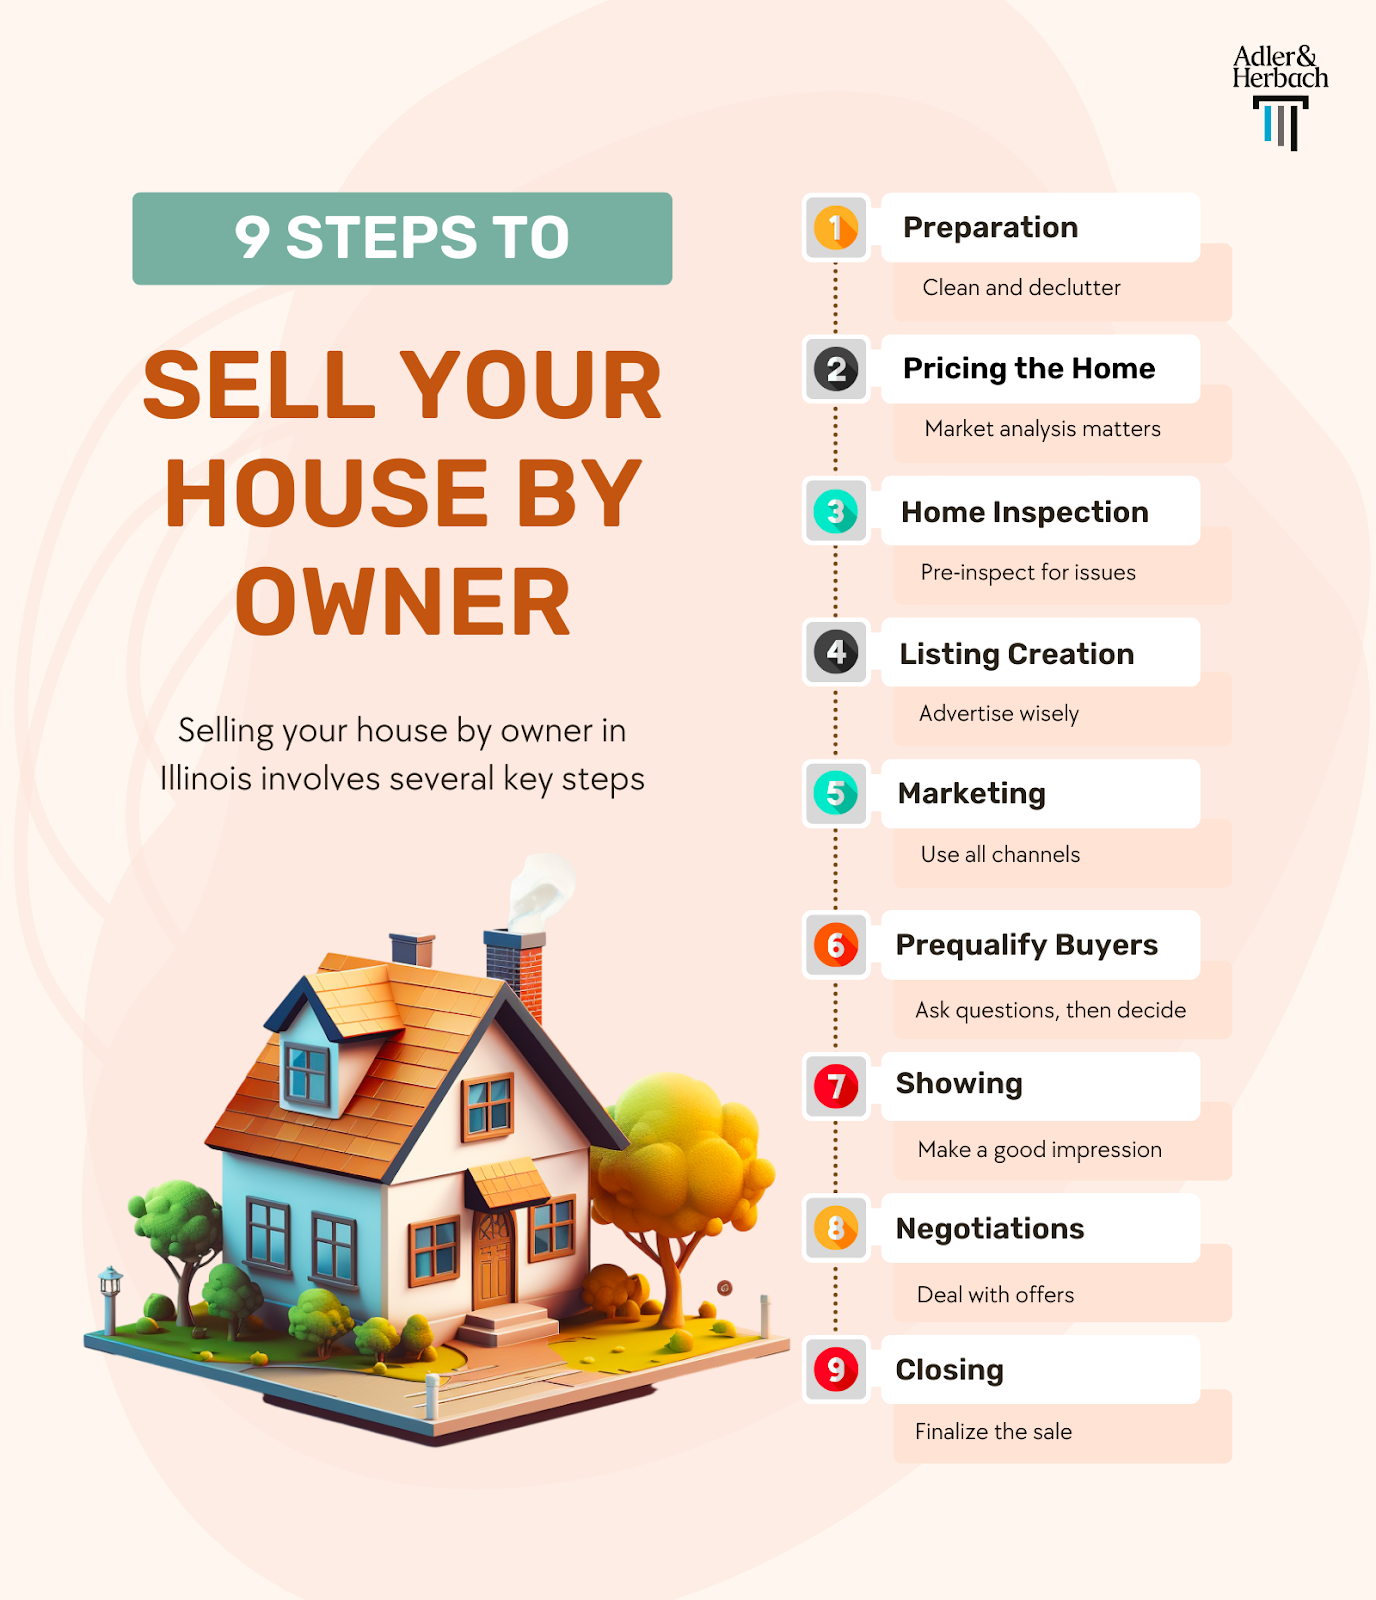 9 steps to sell your house by owner: Prepare your home, set a competitive price, advertise online and offline. Prequalify buyers, negotiate offers, work with an attorney to close the sale.